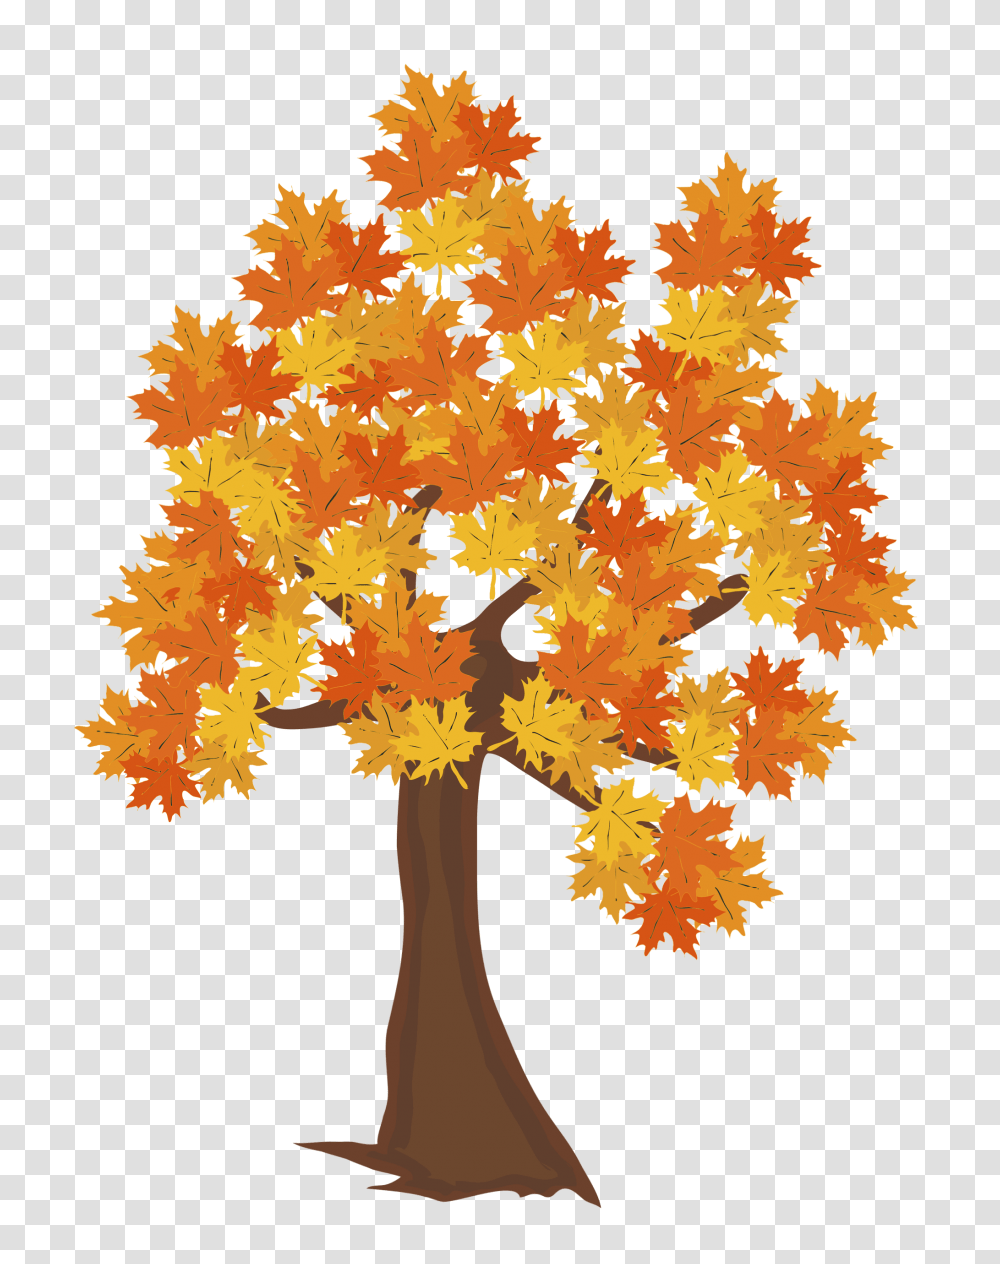 Download Fall Tree Image Autumn Tree Drawing, Leaf, Plant, Maple, Maple Leaf Transparent Png